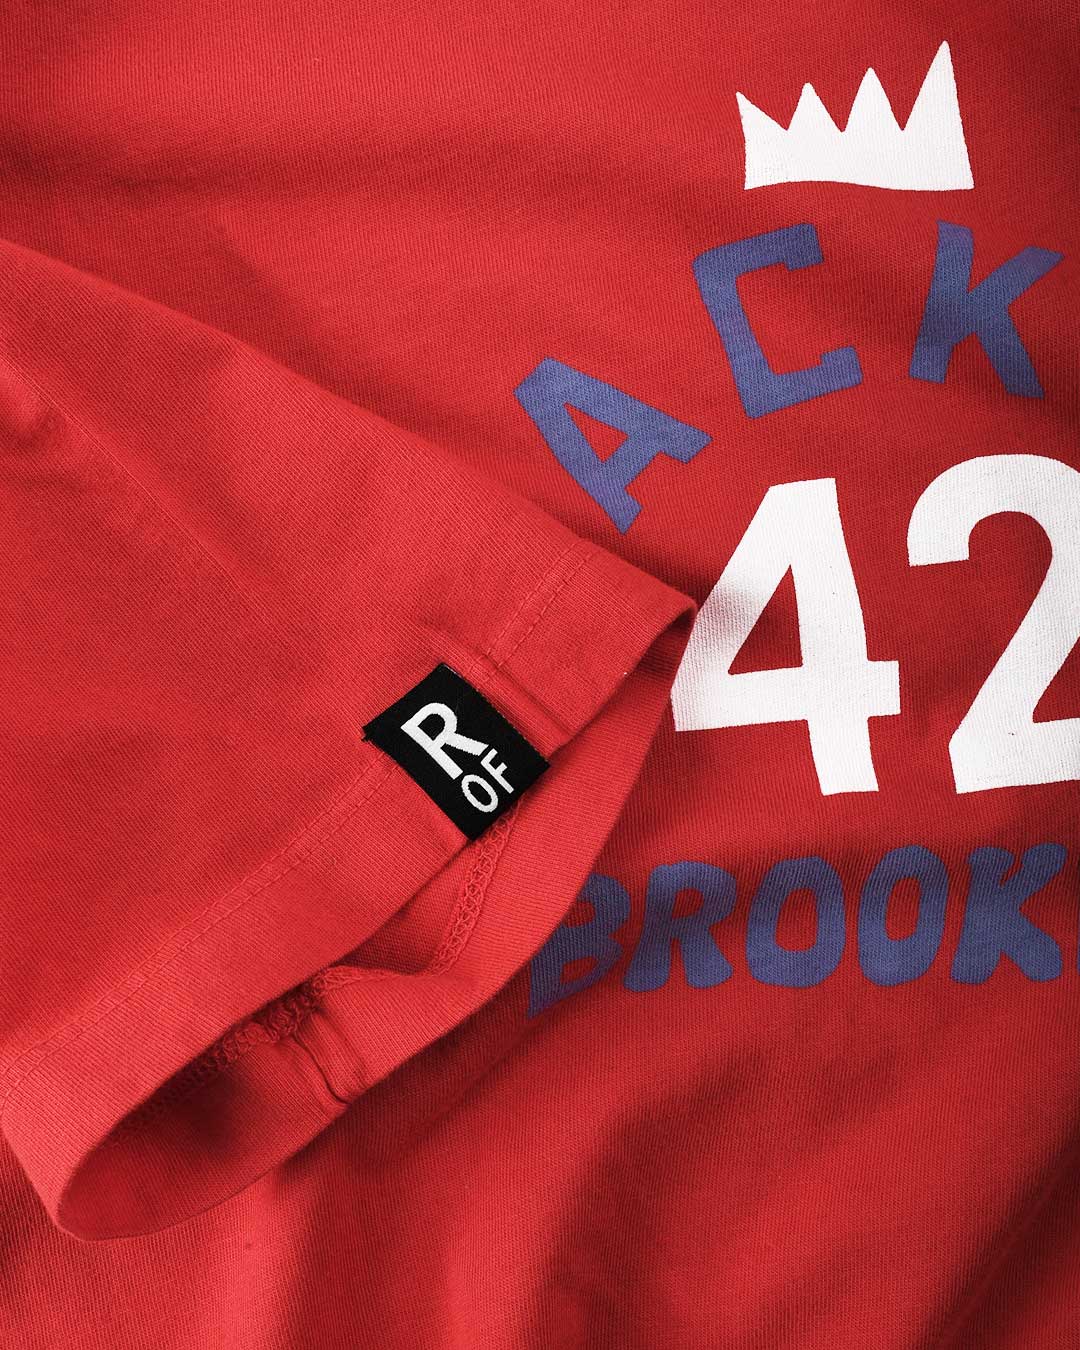 Jackie Robinson #42 Crown Red Tee - Roots of Fight